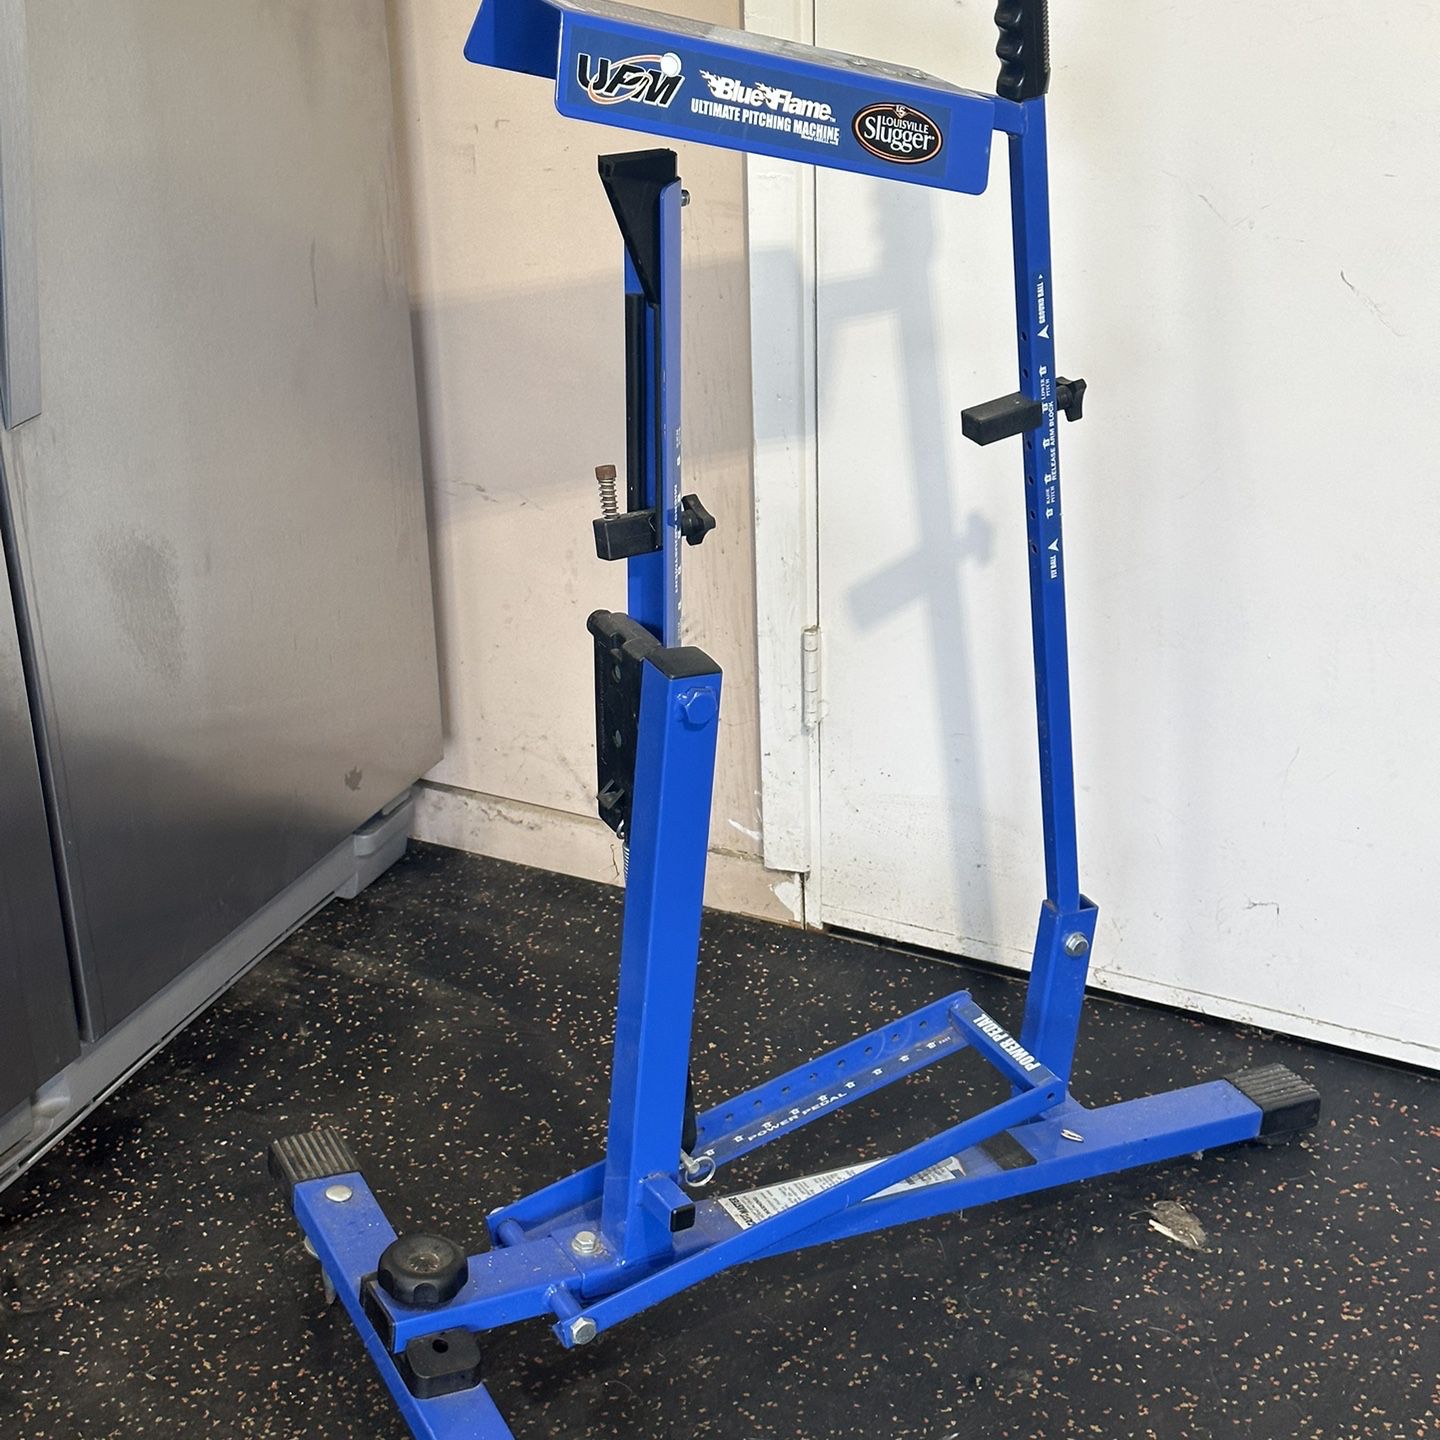 Louisville Slugger Blue Flame Pitching Machine for Sale in Placentia, CA -  OfferUp